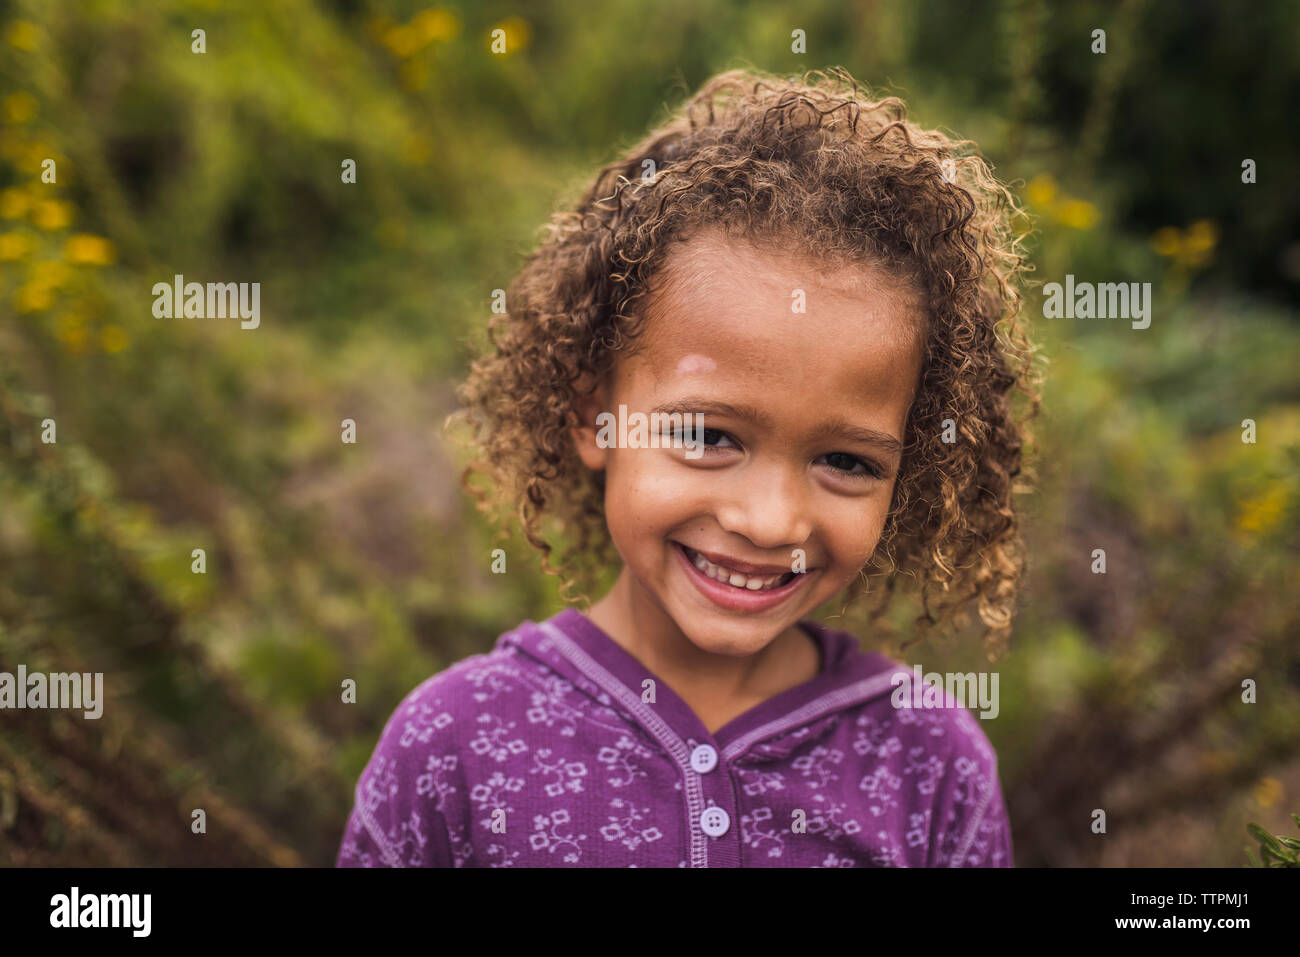 Close-up portrait of happy girl with curly hair standing against plants in park Stock Photo